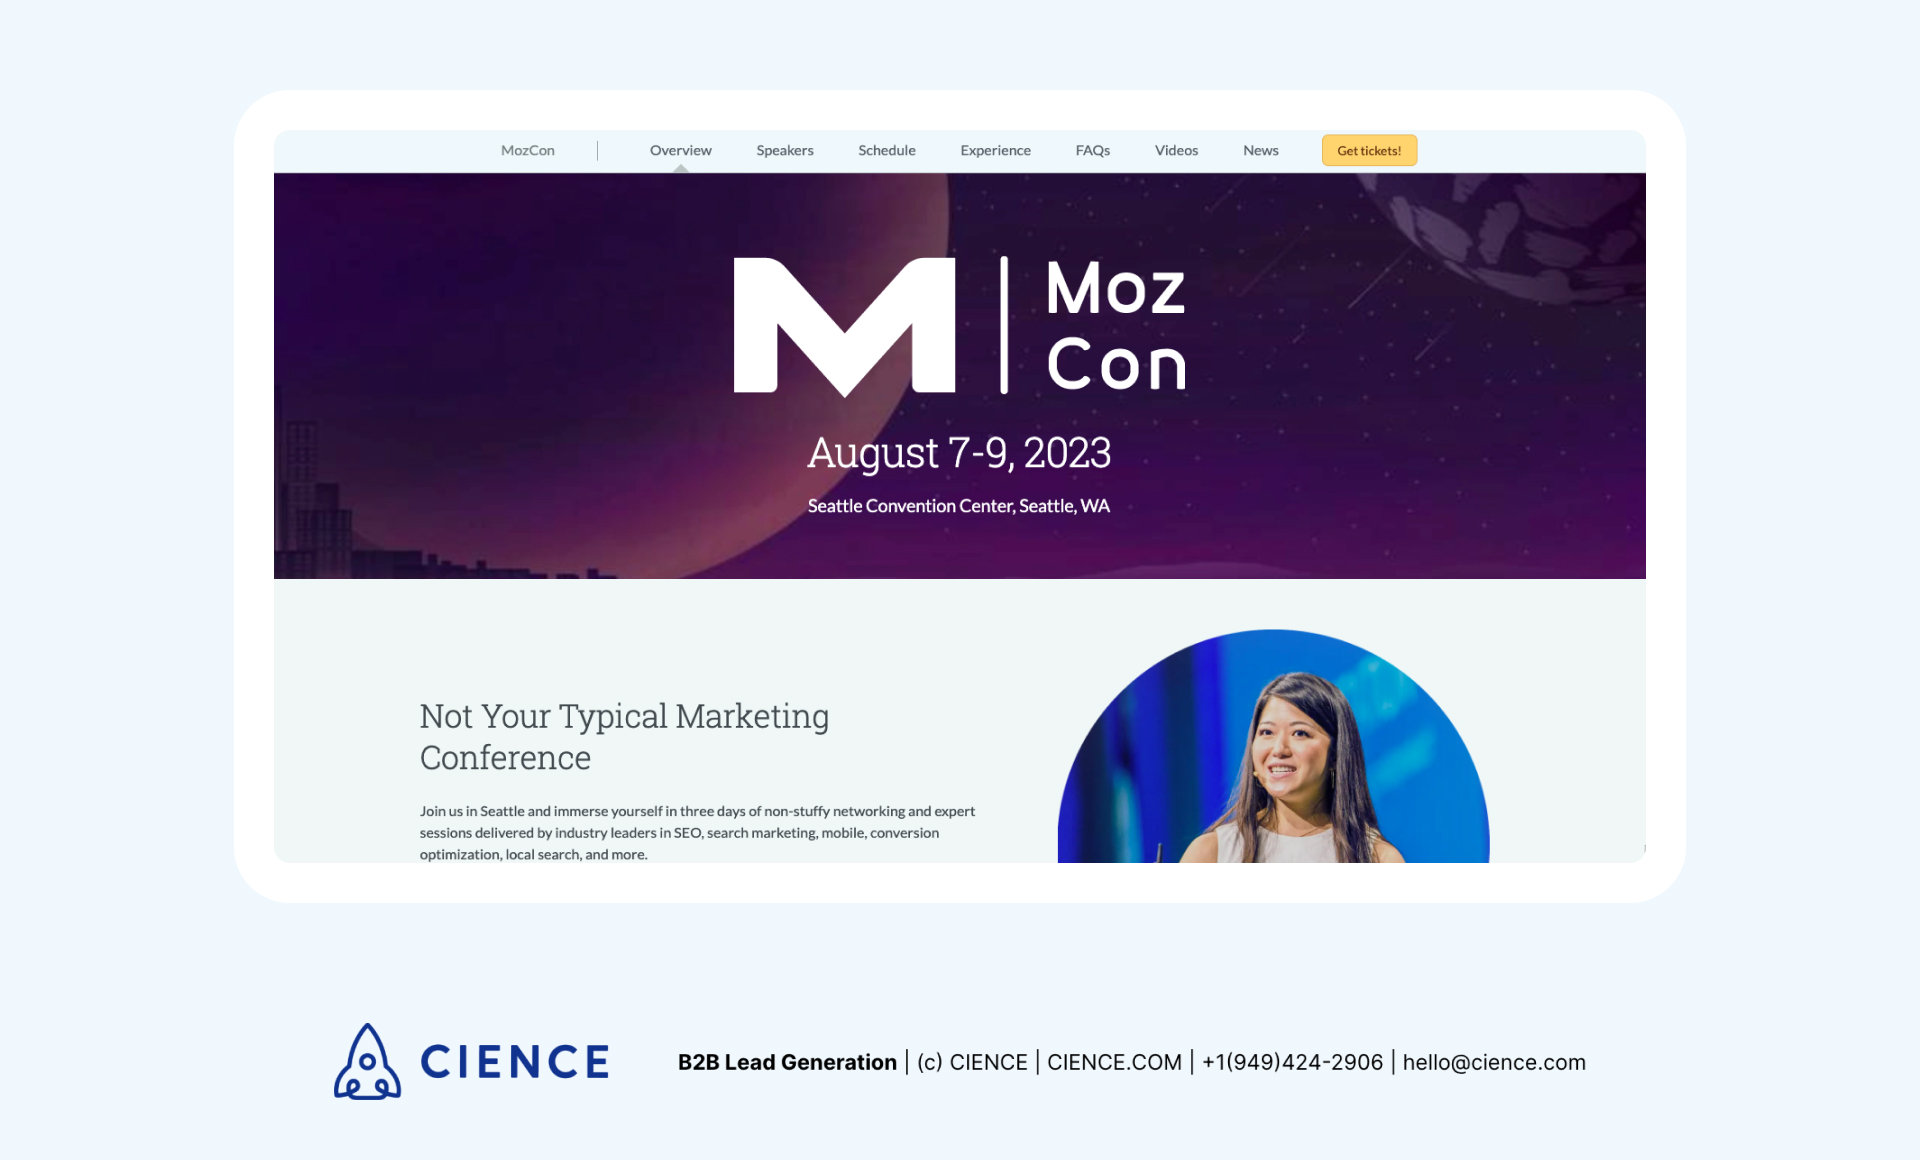 Top marketing conference 2023 - MozCon